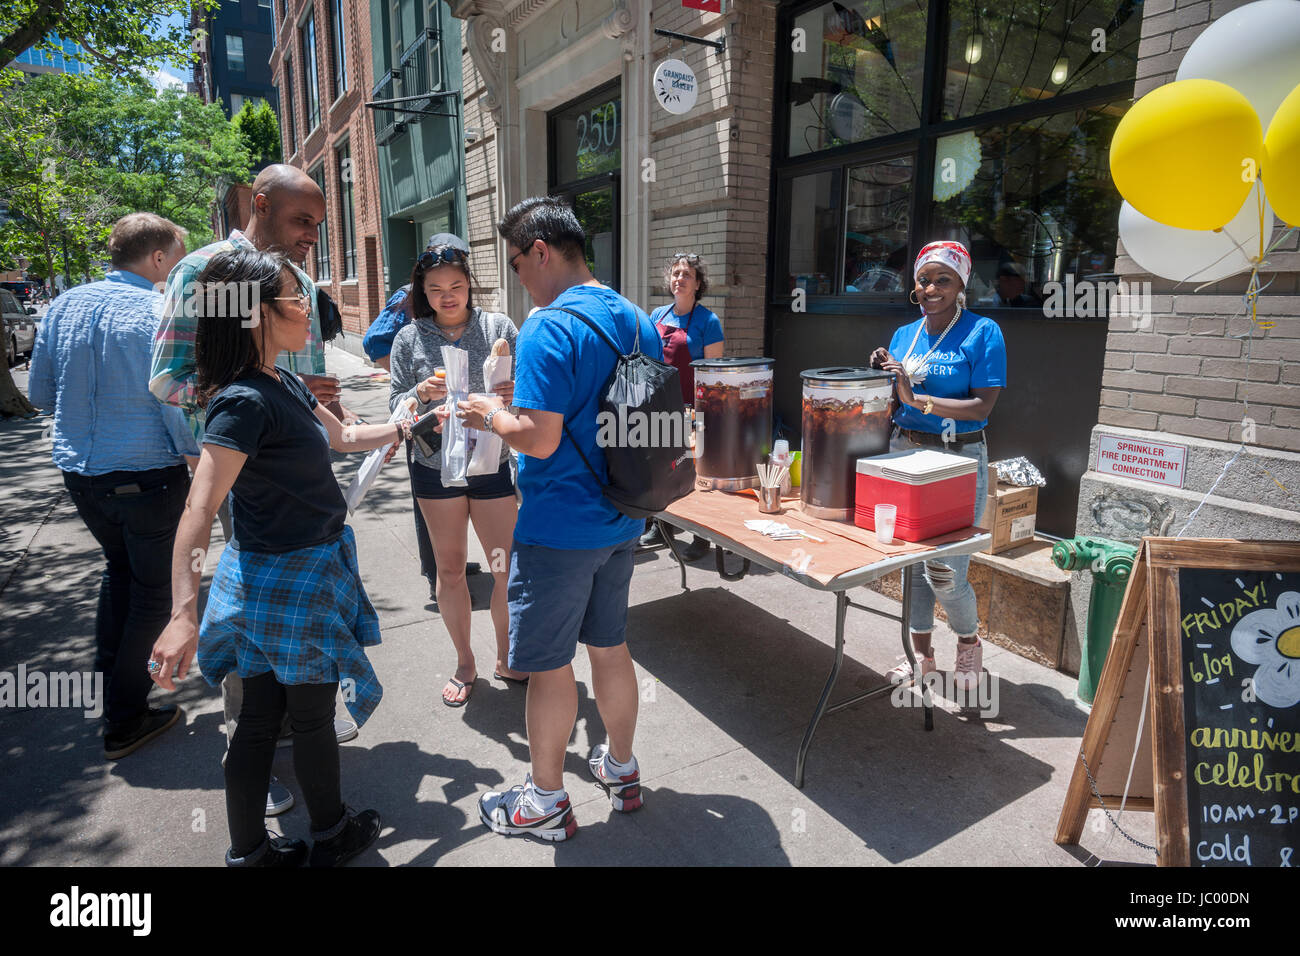 The Grandaisy Bakery in the Tribeca neighborhood of New York celebrates its 10 years in business on Friday, June 9, 2017. The bakers distributed free loaves of their bread and coffee and tea to customers who came by. (© Richard B. Levine) Stock Photo